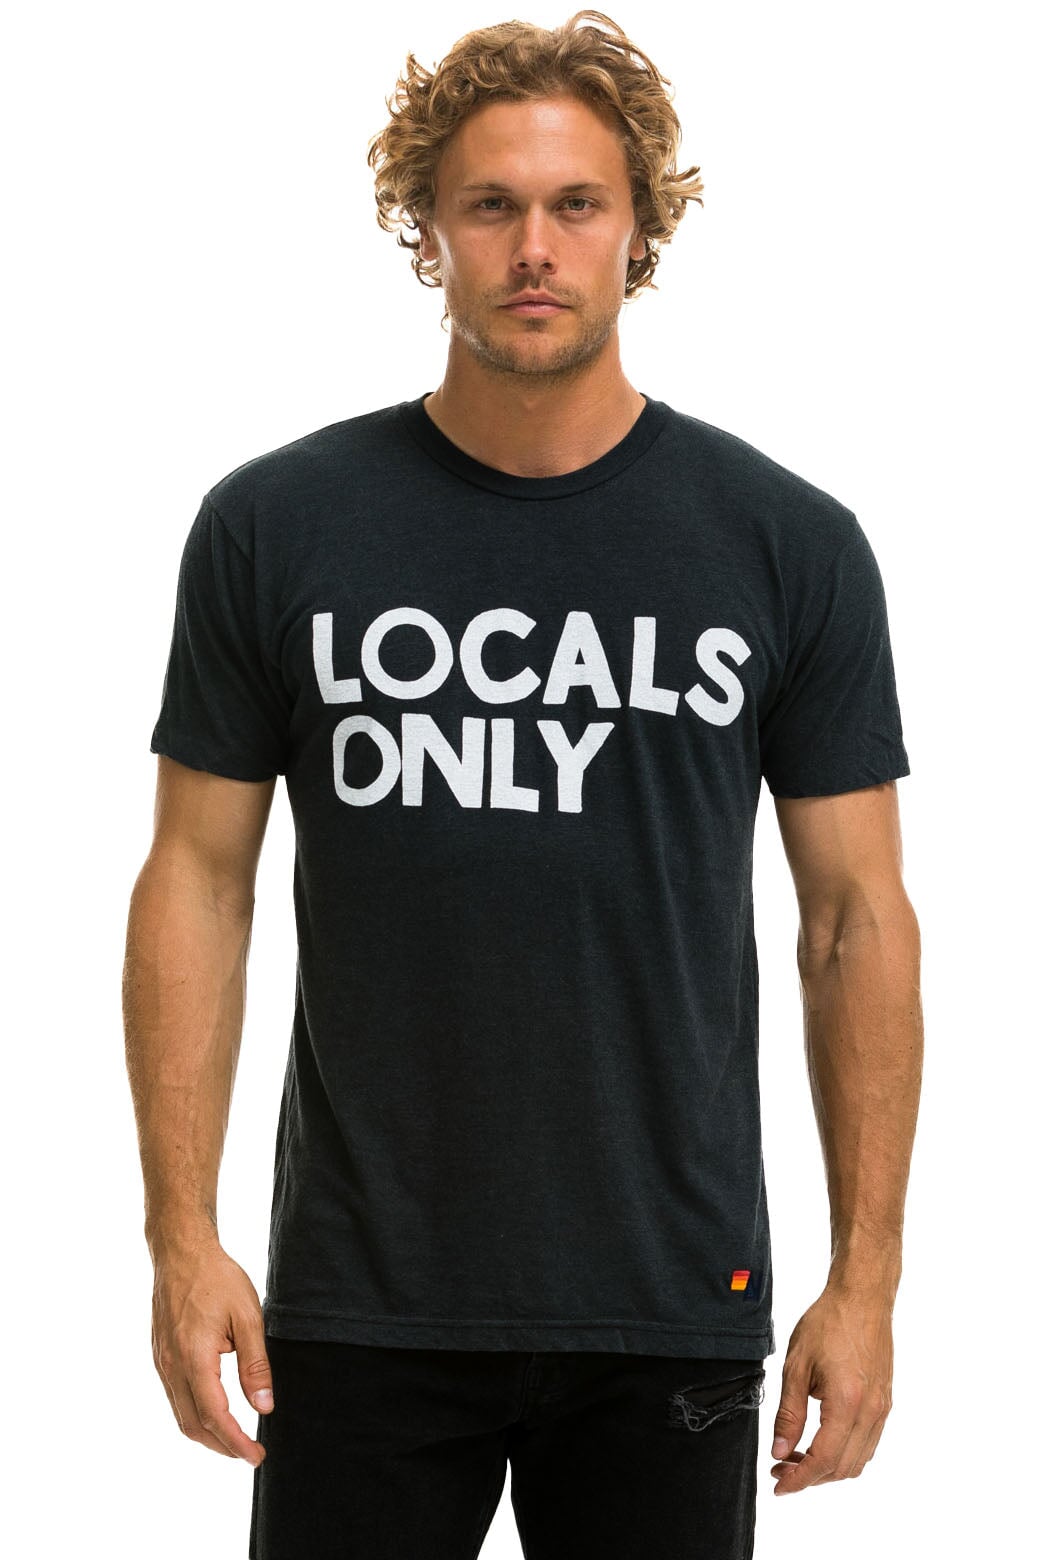 LOCALS ONLY TEE - CHARCOAL Tees Aviator Nation 